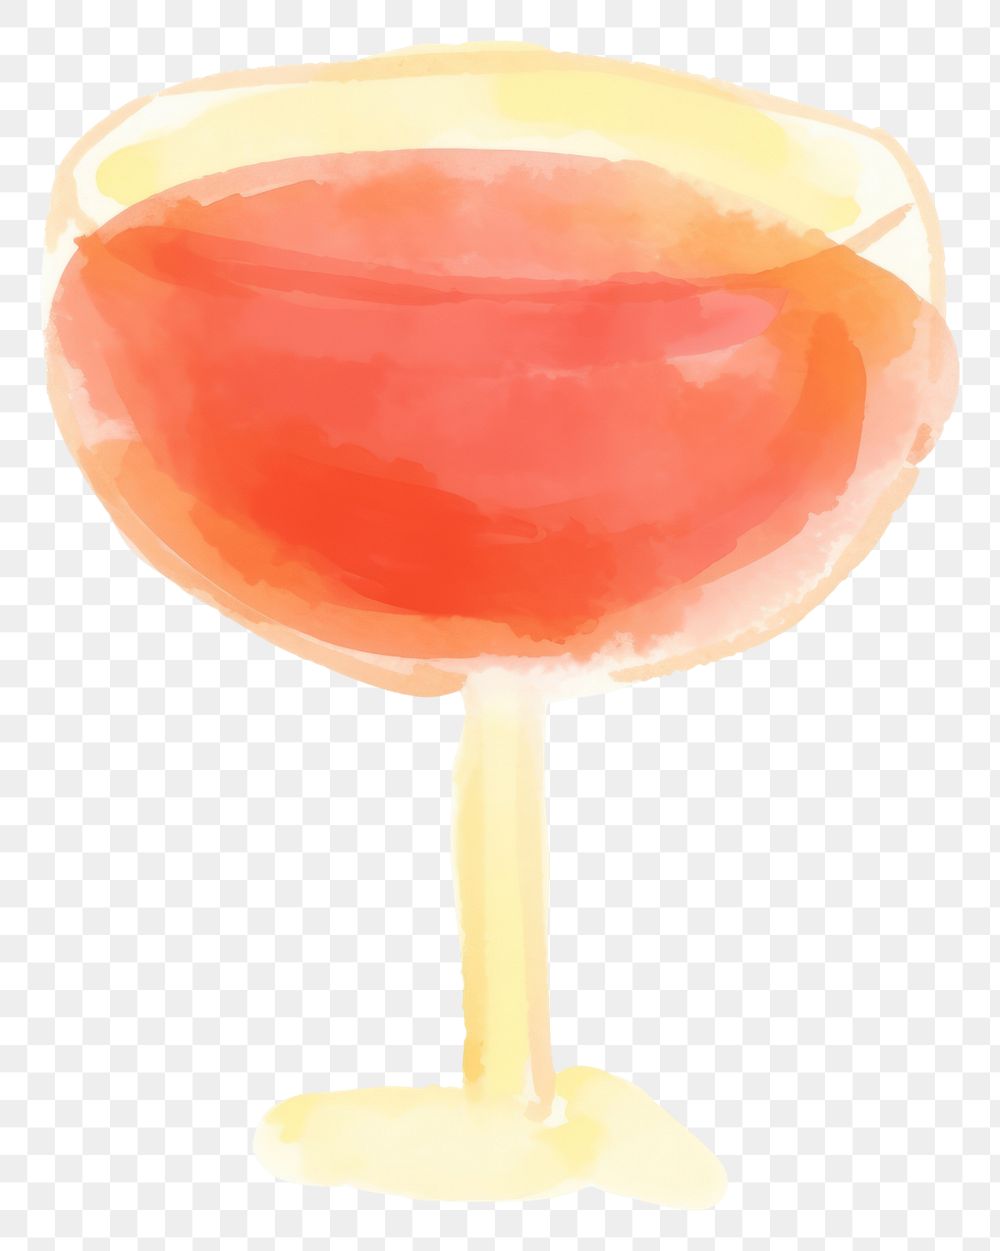 PNG Hand drawn a cocktail in kid illustration book style glass white background confectionery.